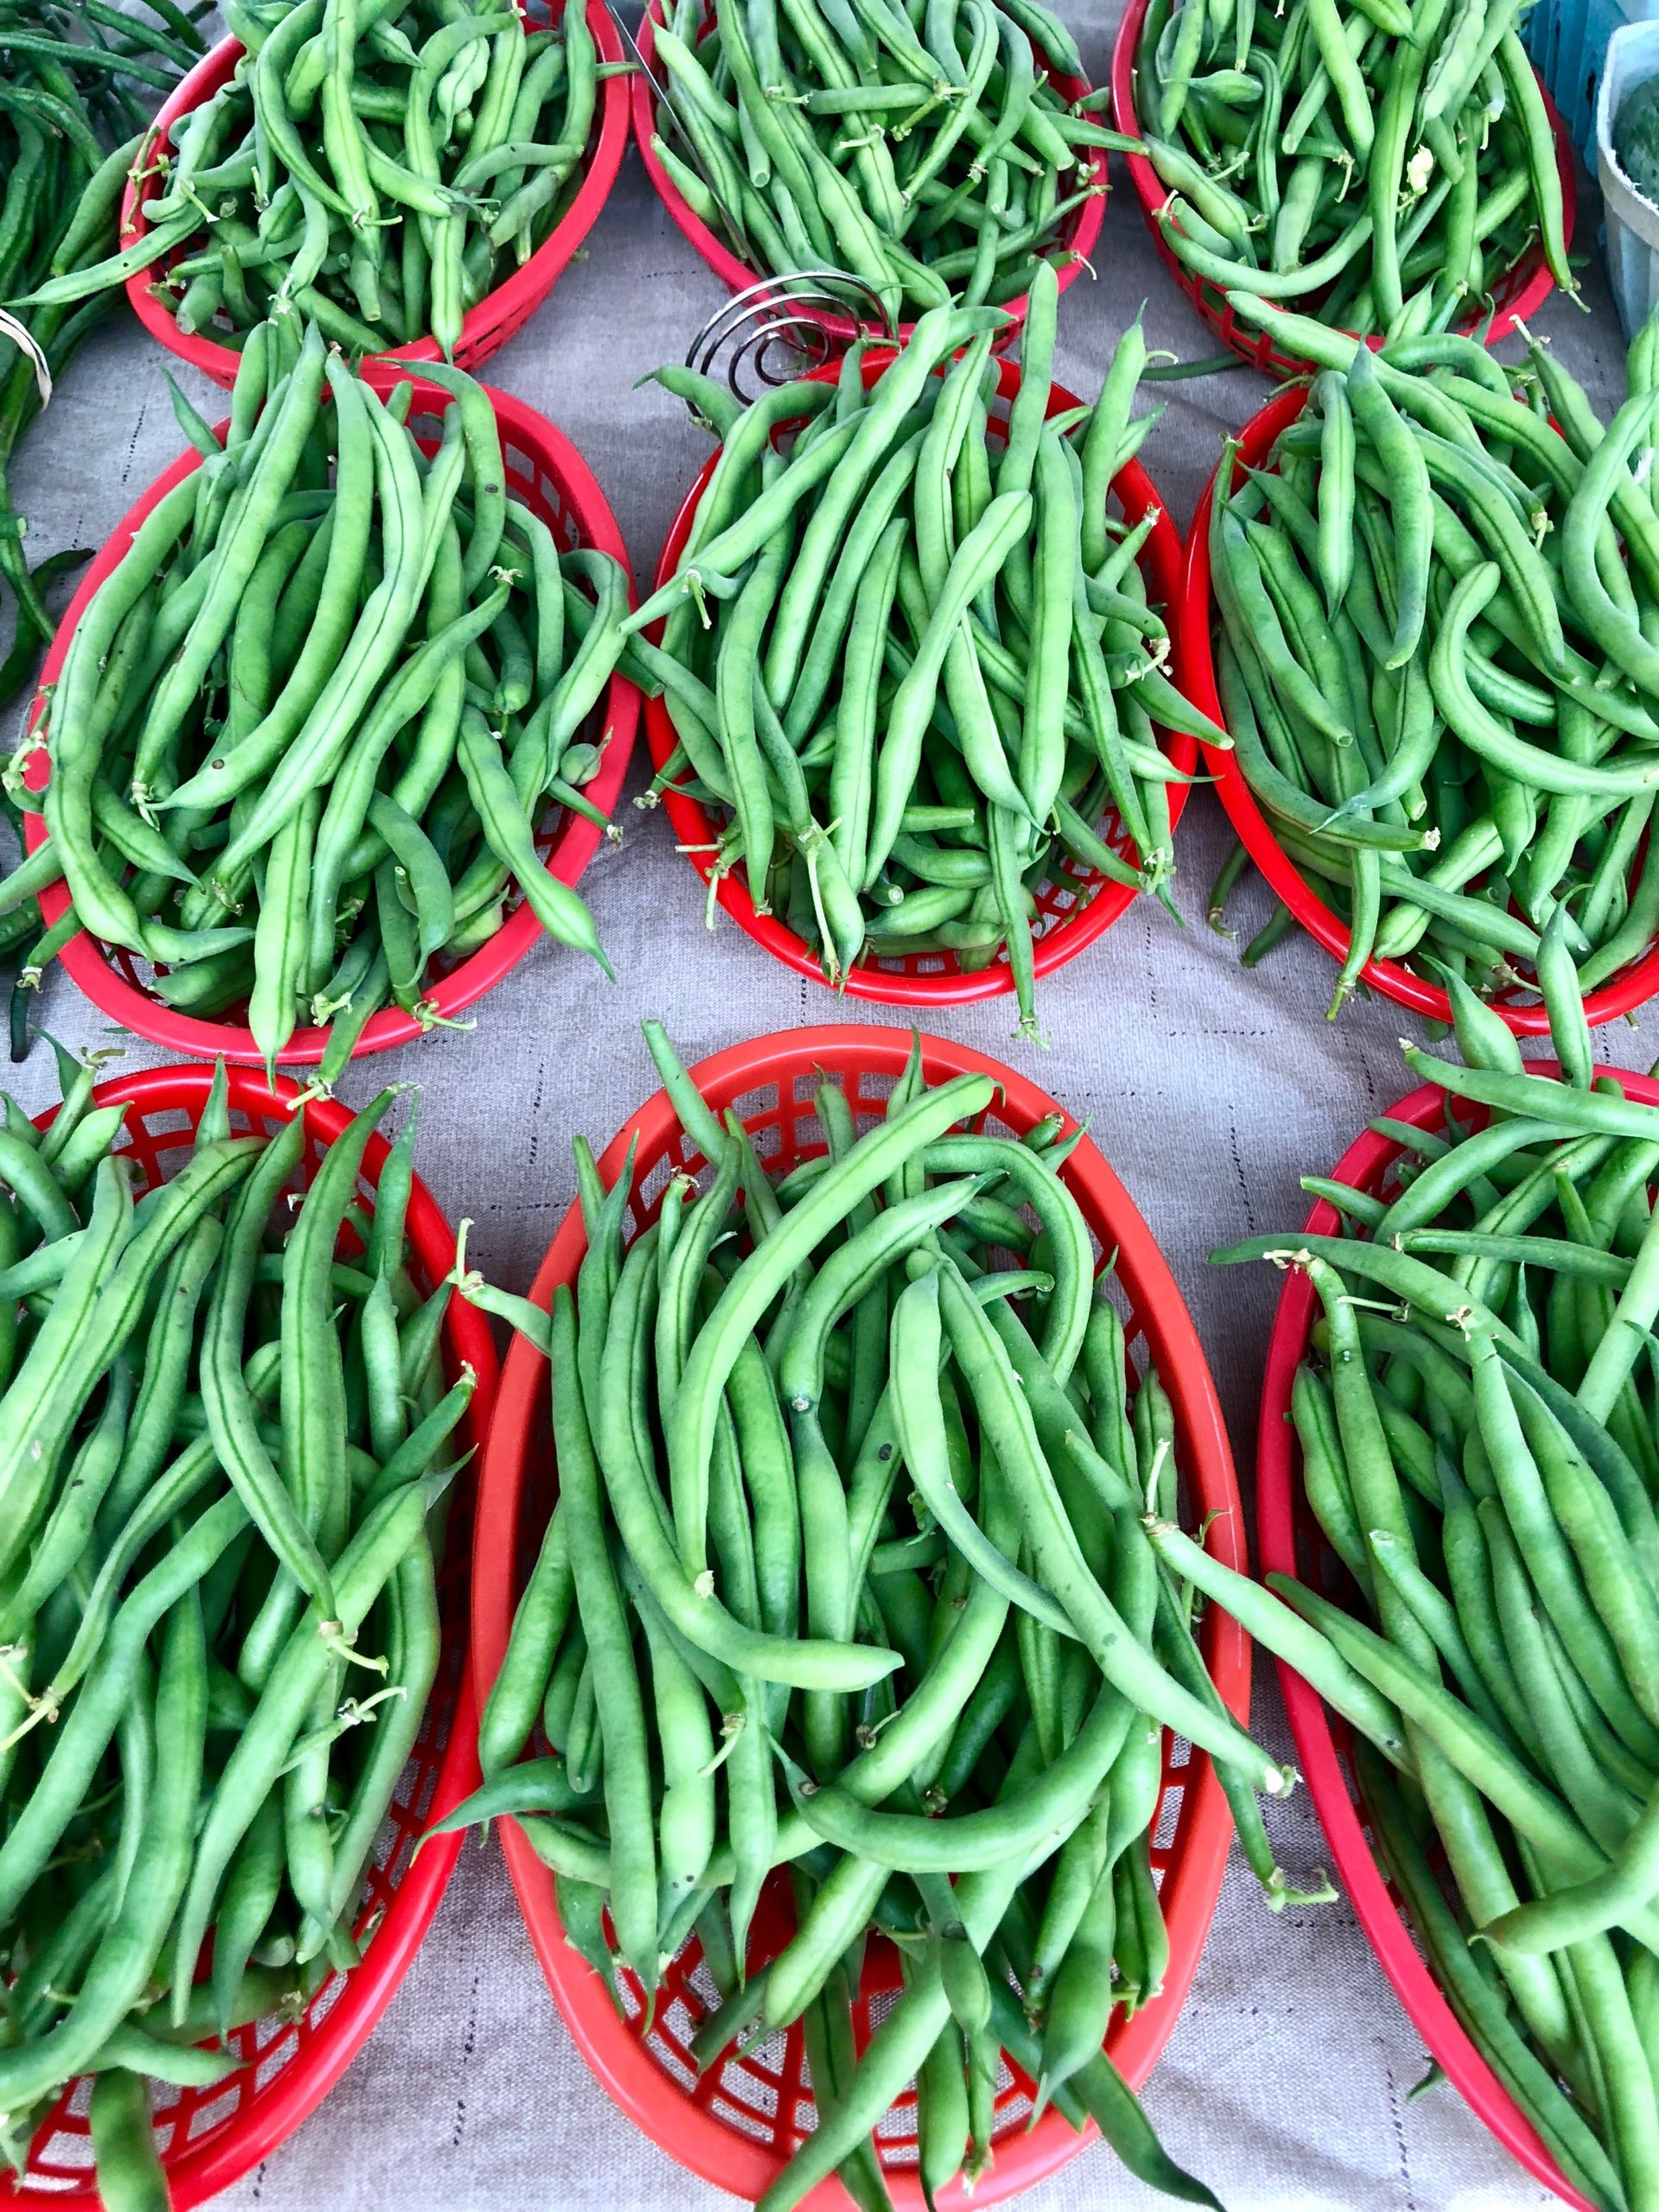 Green beans in baskets